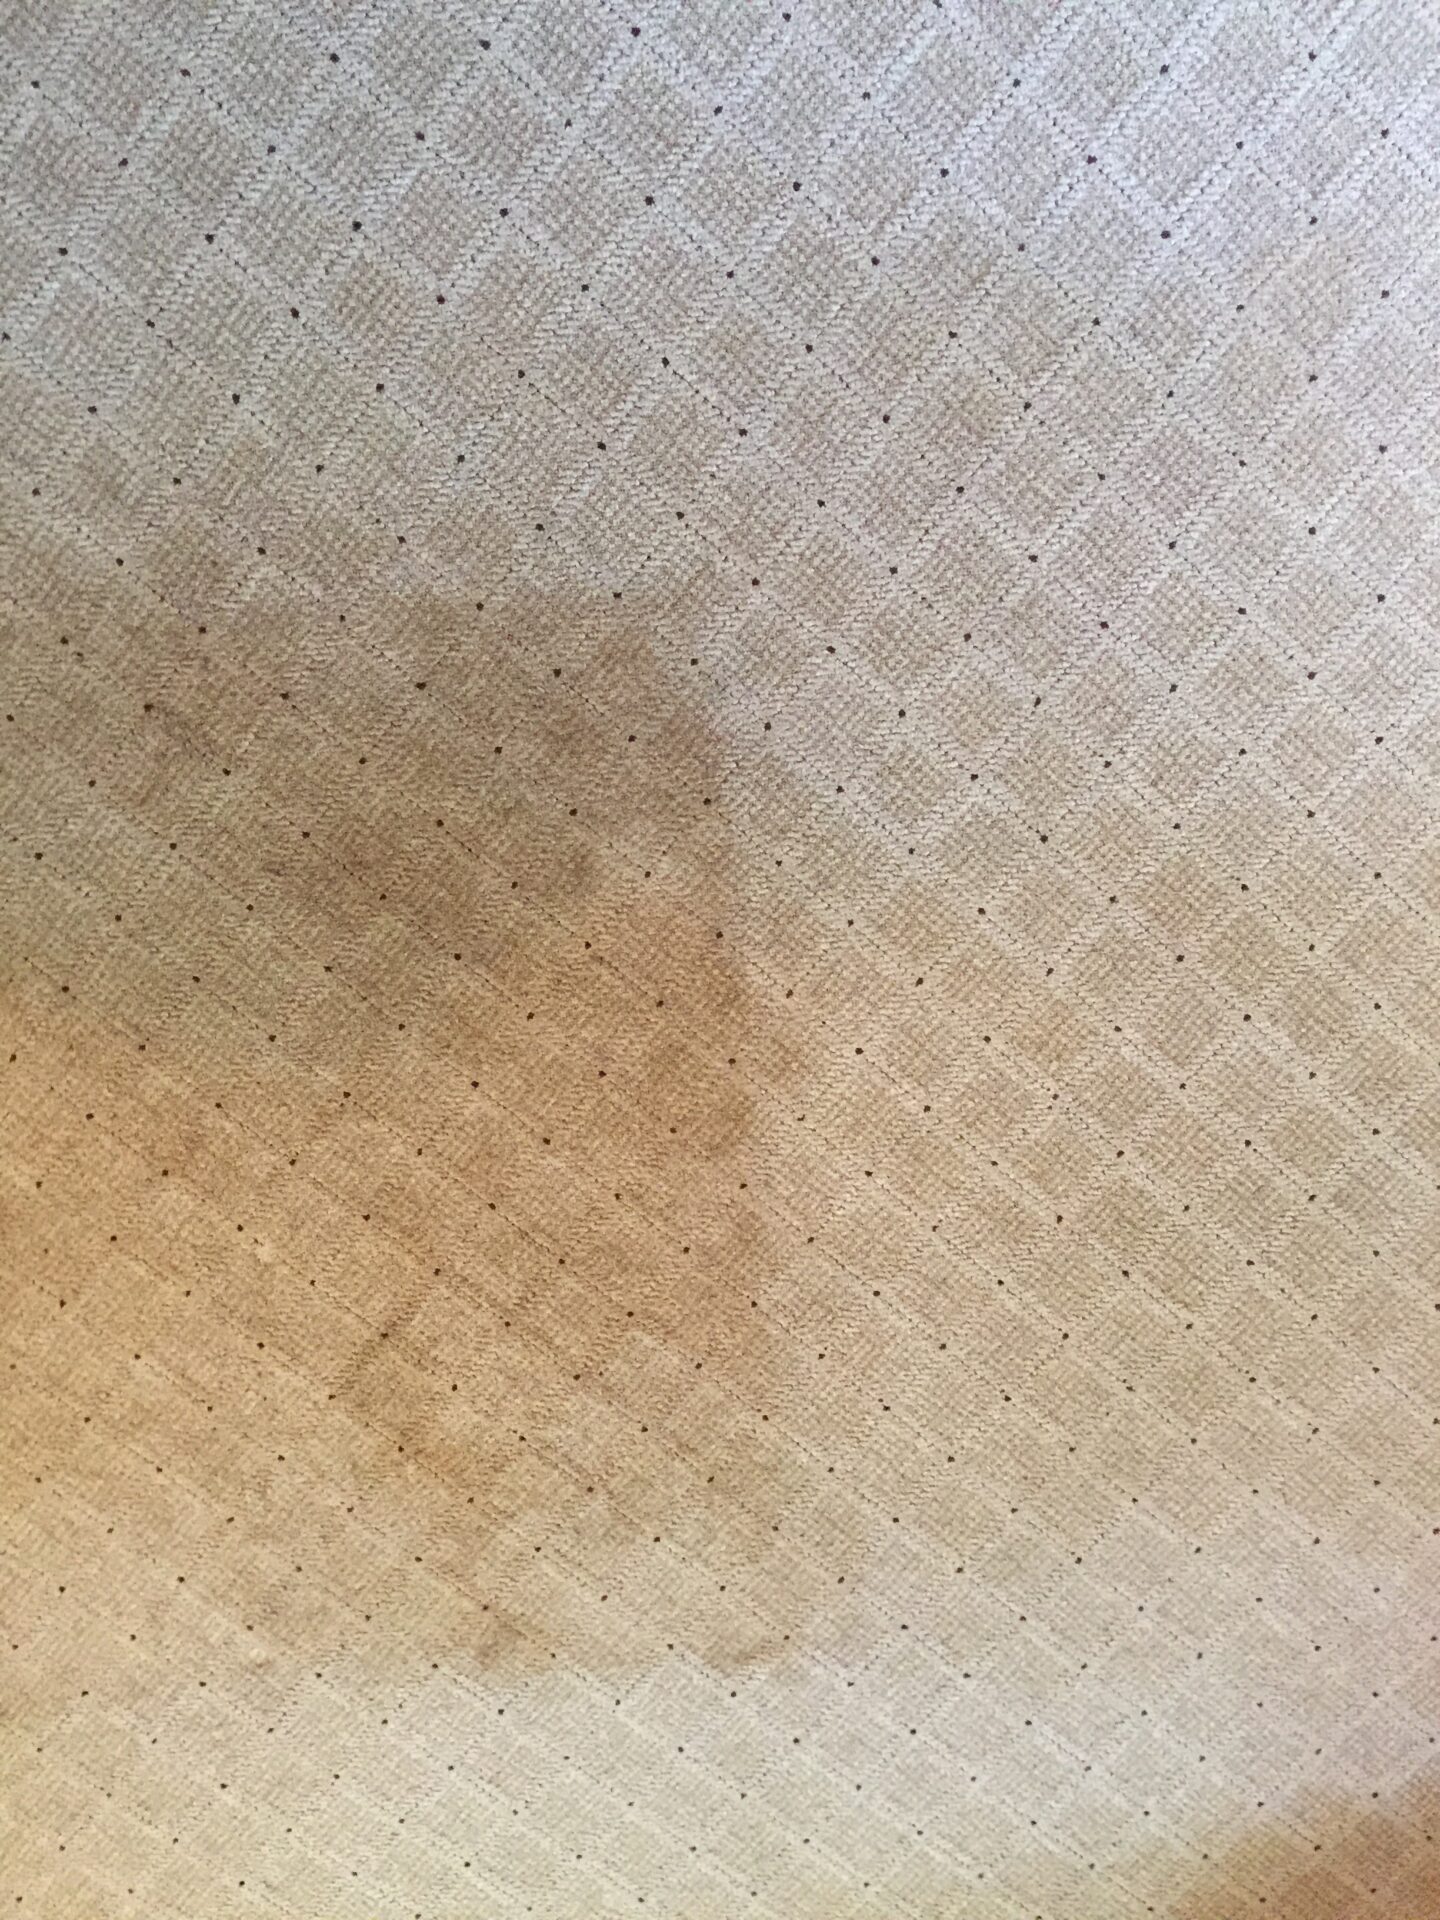 A floor of the house before cleaning